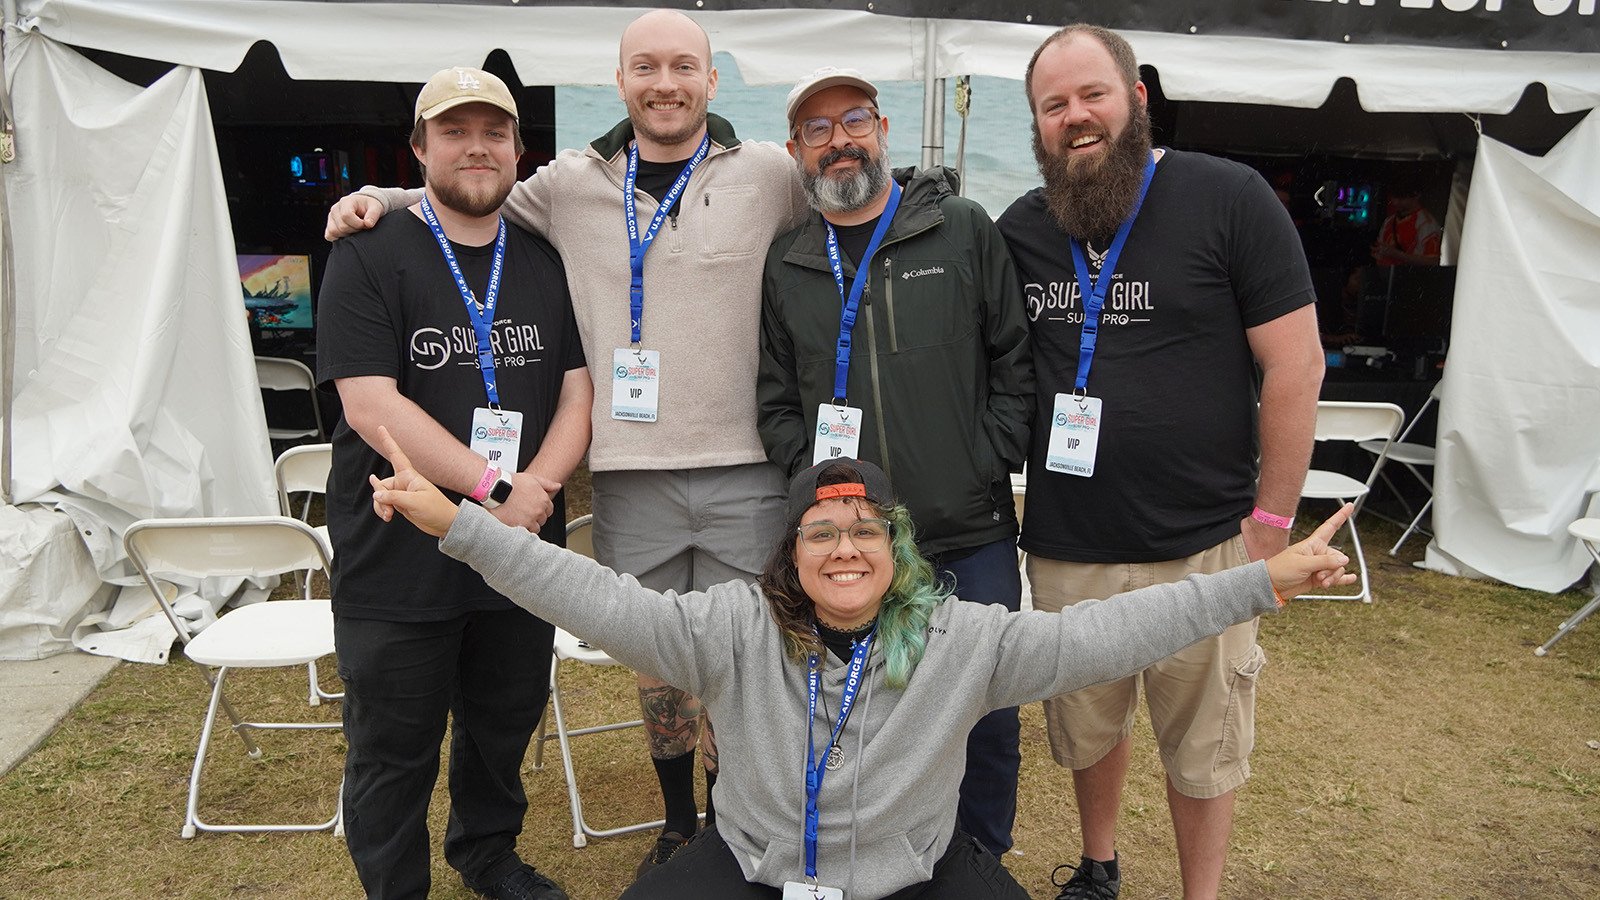 A group of five people standing in front of a large festival tent with rows of gaming computers set up inside.